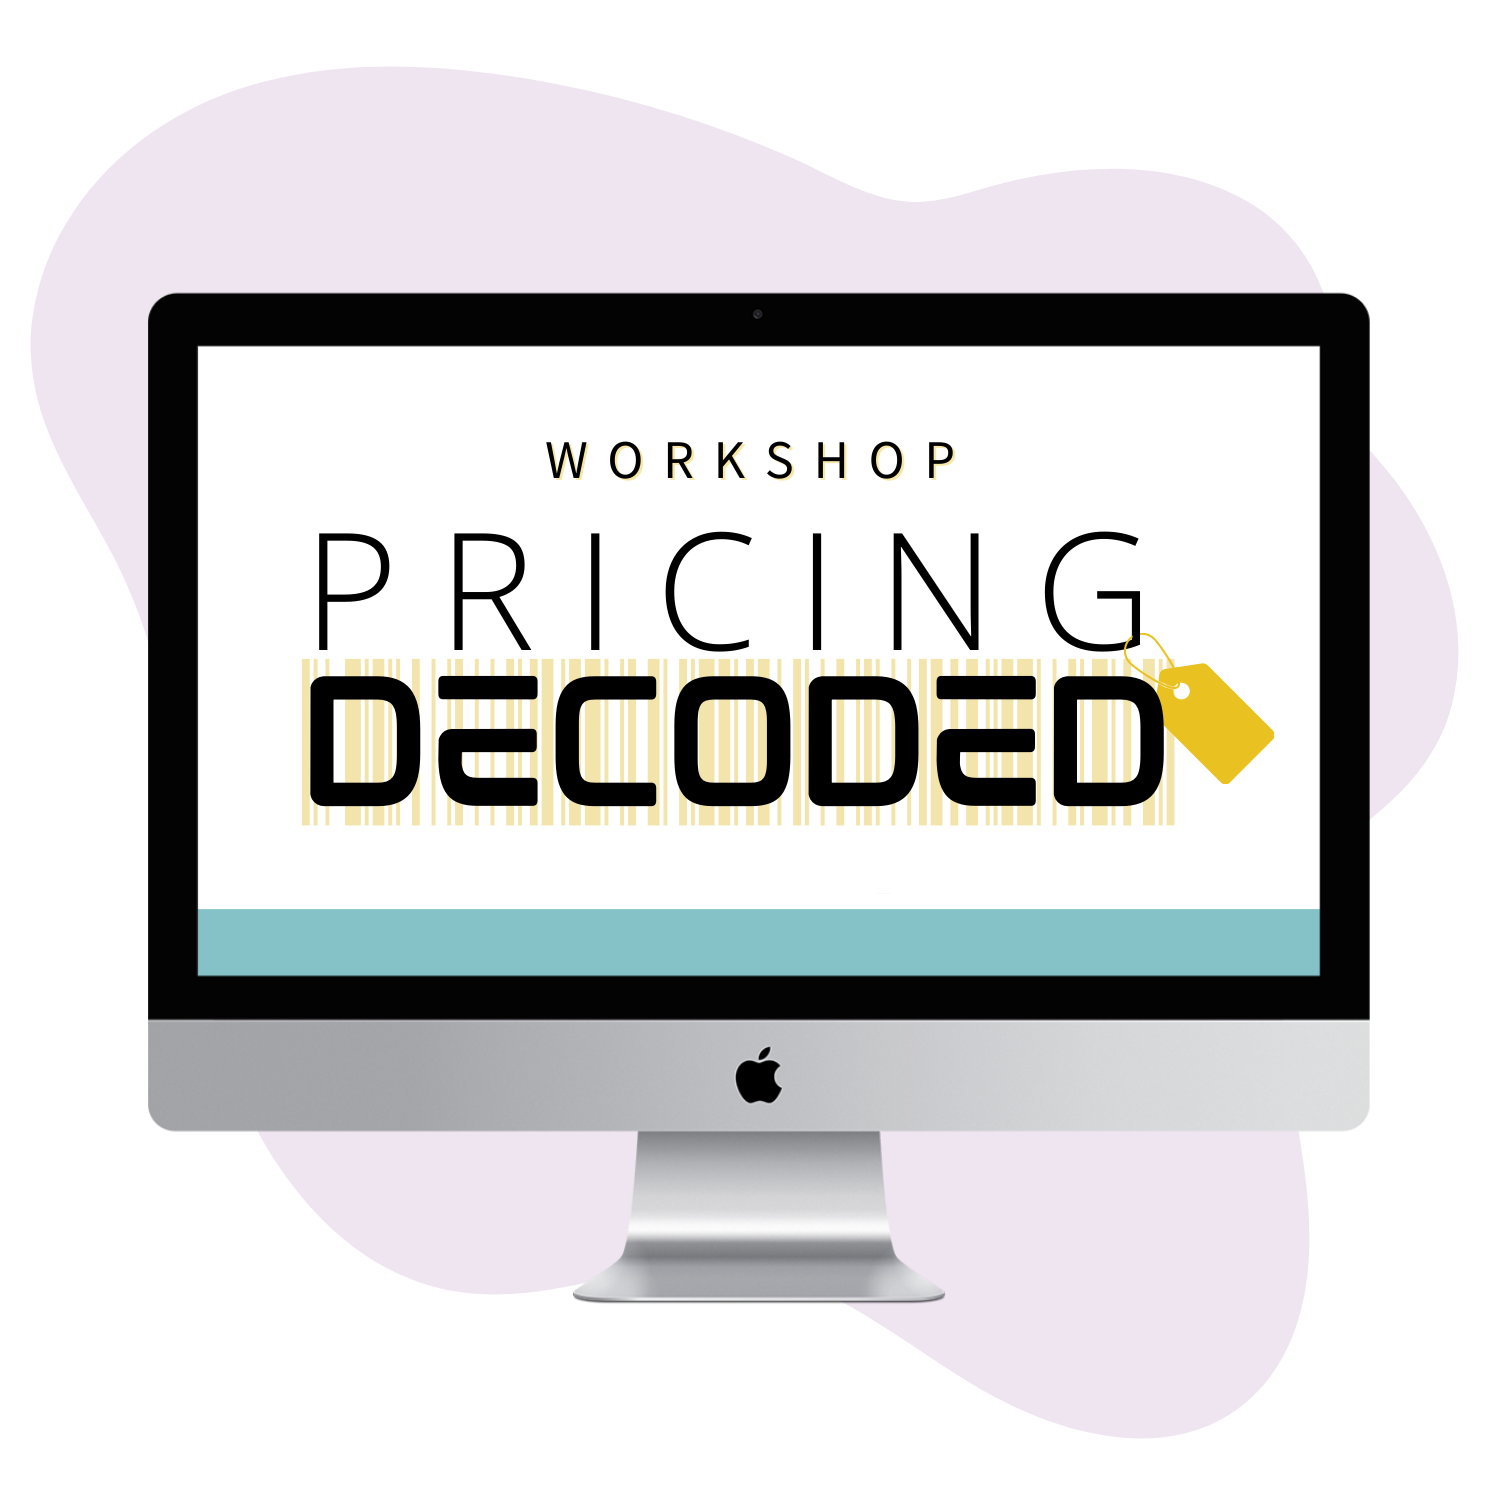 Pricing Decoded - How to Price Digital Products